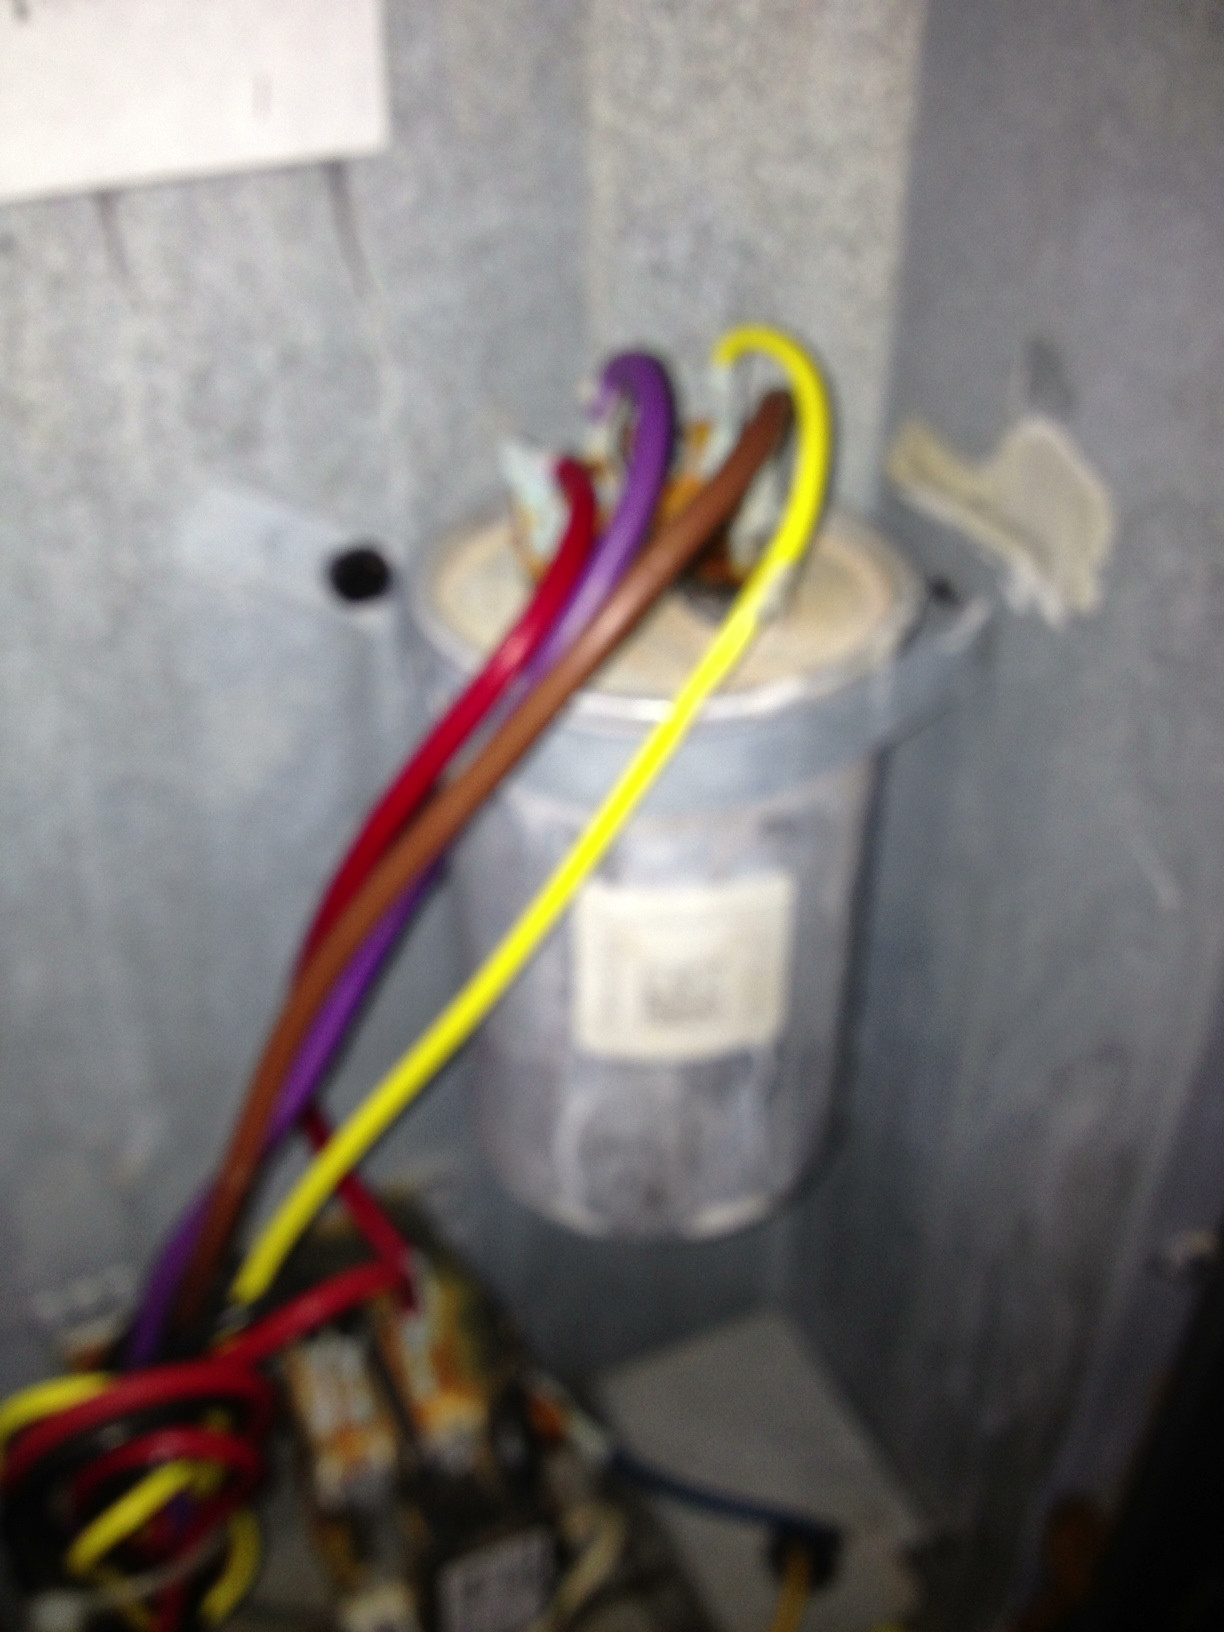 How can I repair these rusty electrical connections? - Home ...